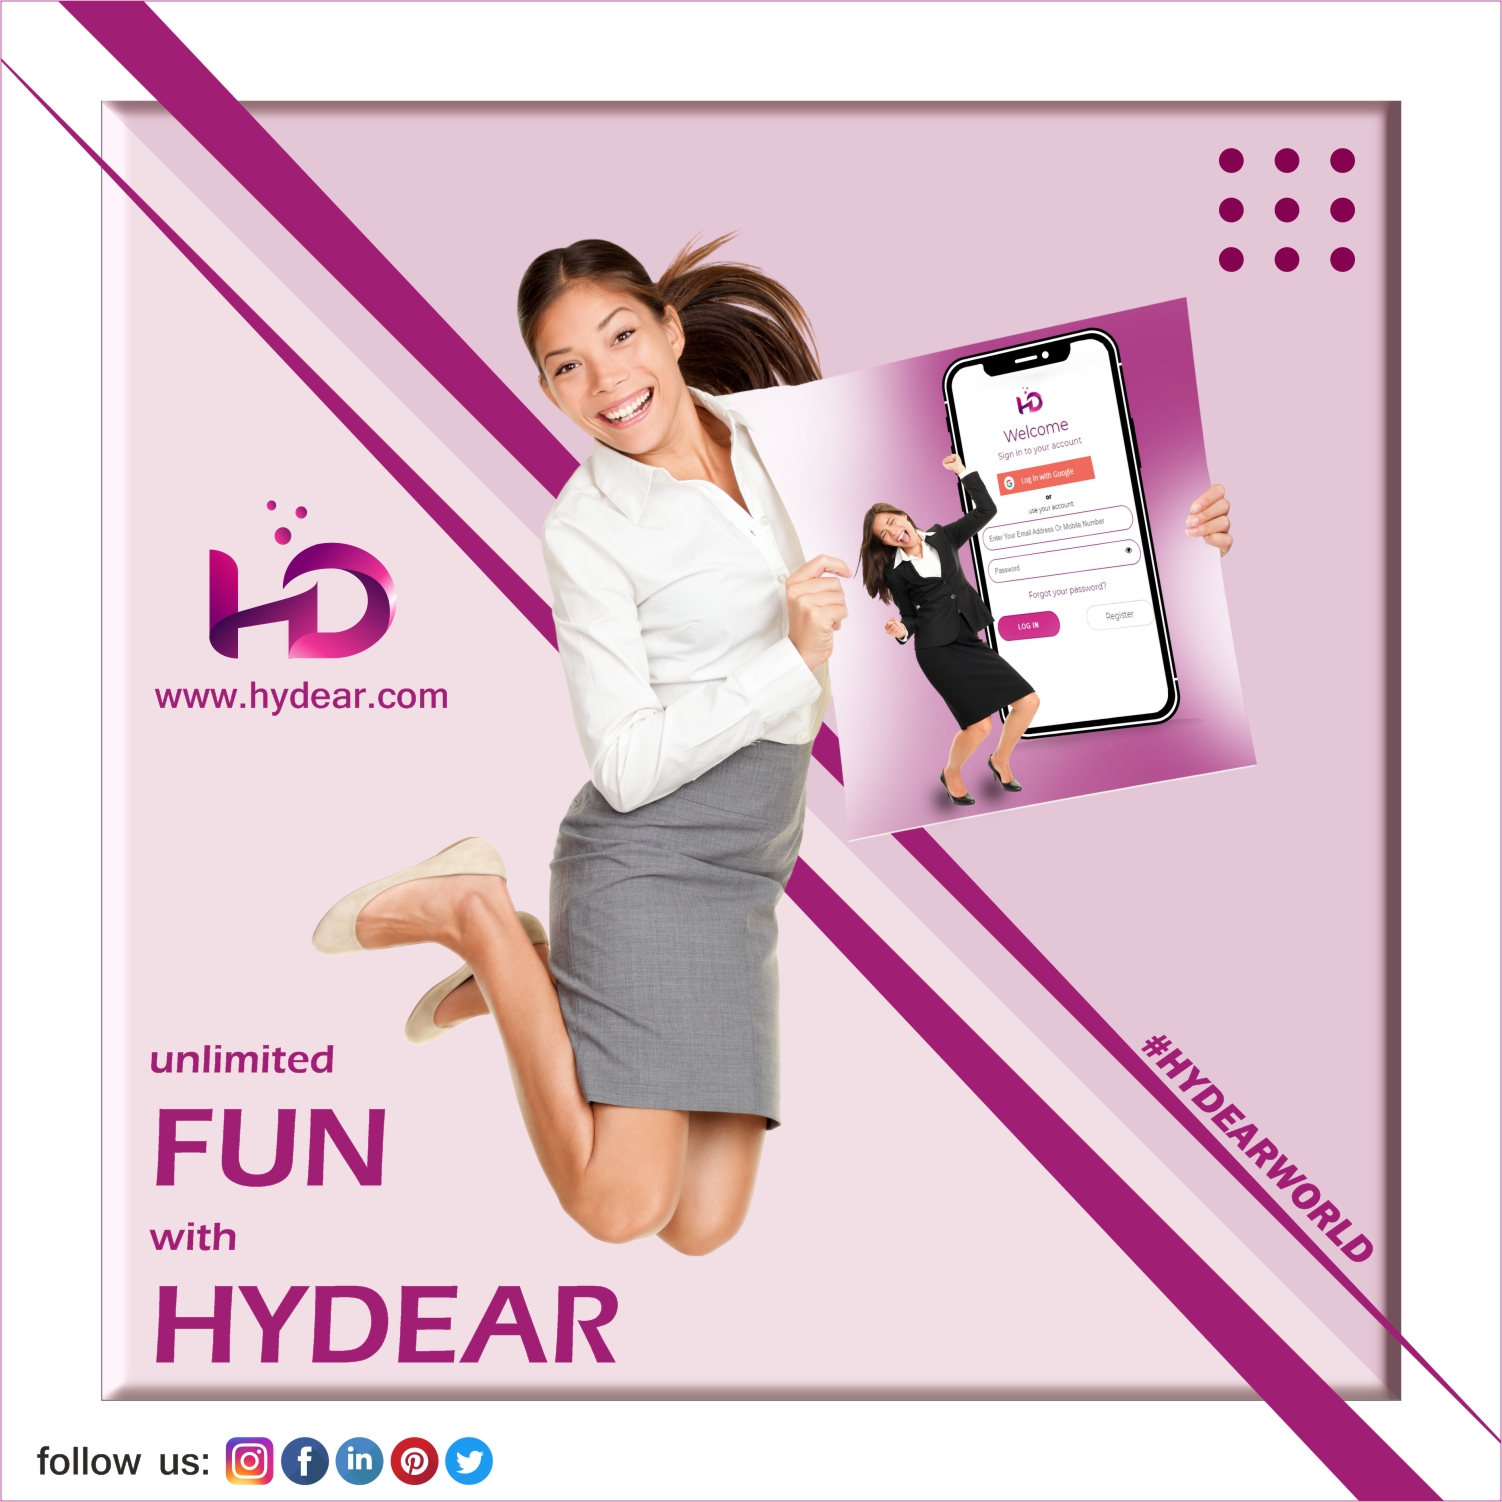 Hydear is a upgraded version of social media with all in one optionEntertainmentOther EntertainmentWest DelhiUttam Nagar